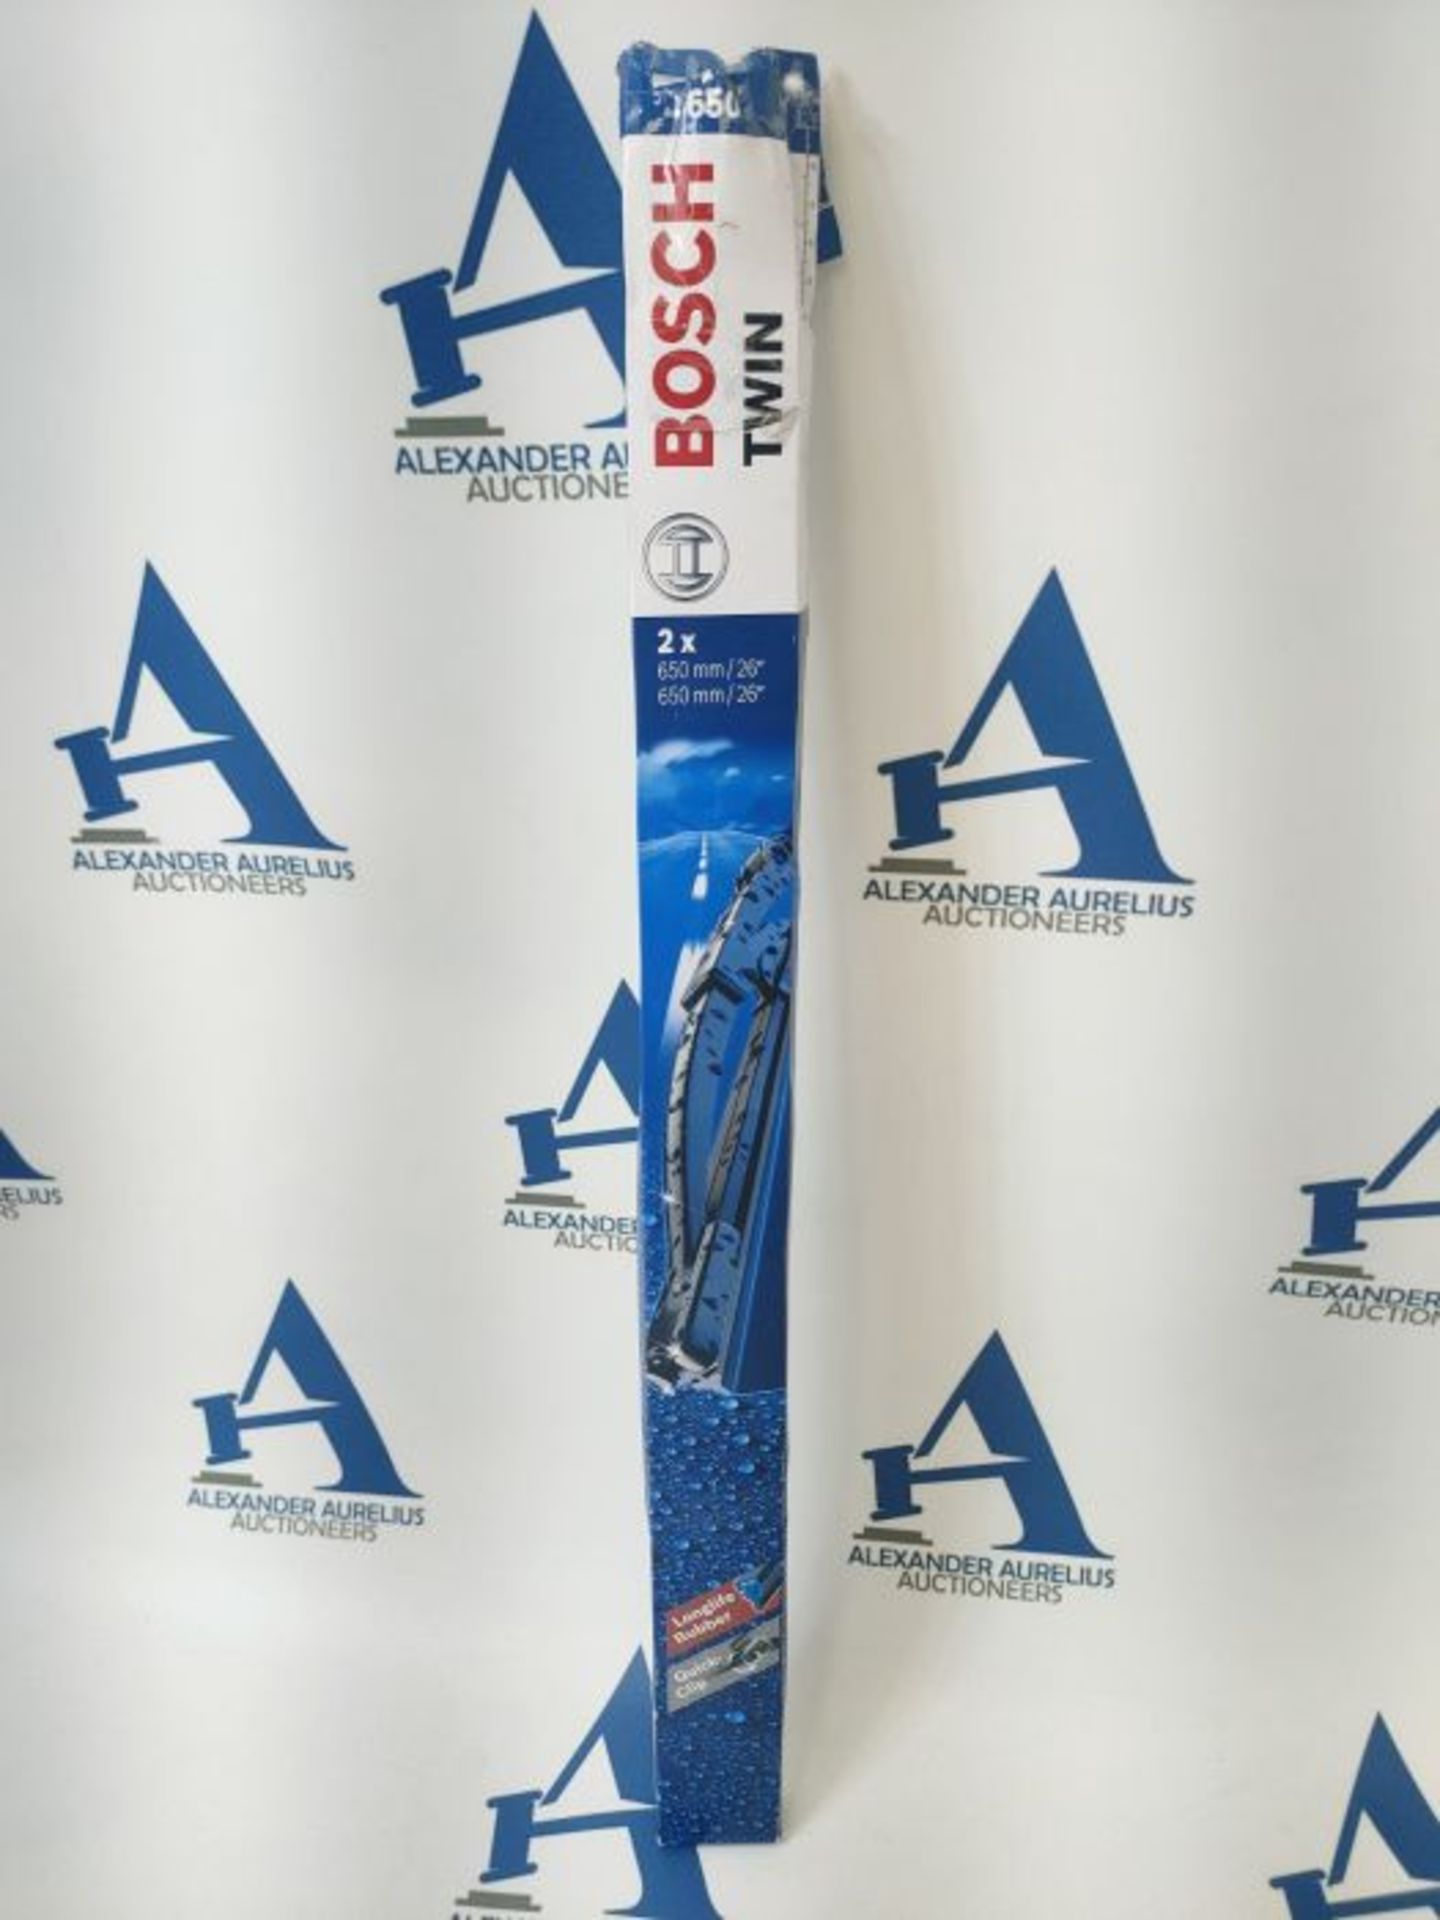 Bosch Wiper Blade Twin 650, Length: 650mm/650mm - Set of Front Wiper Blades - Image 2 of 3